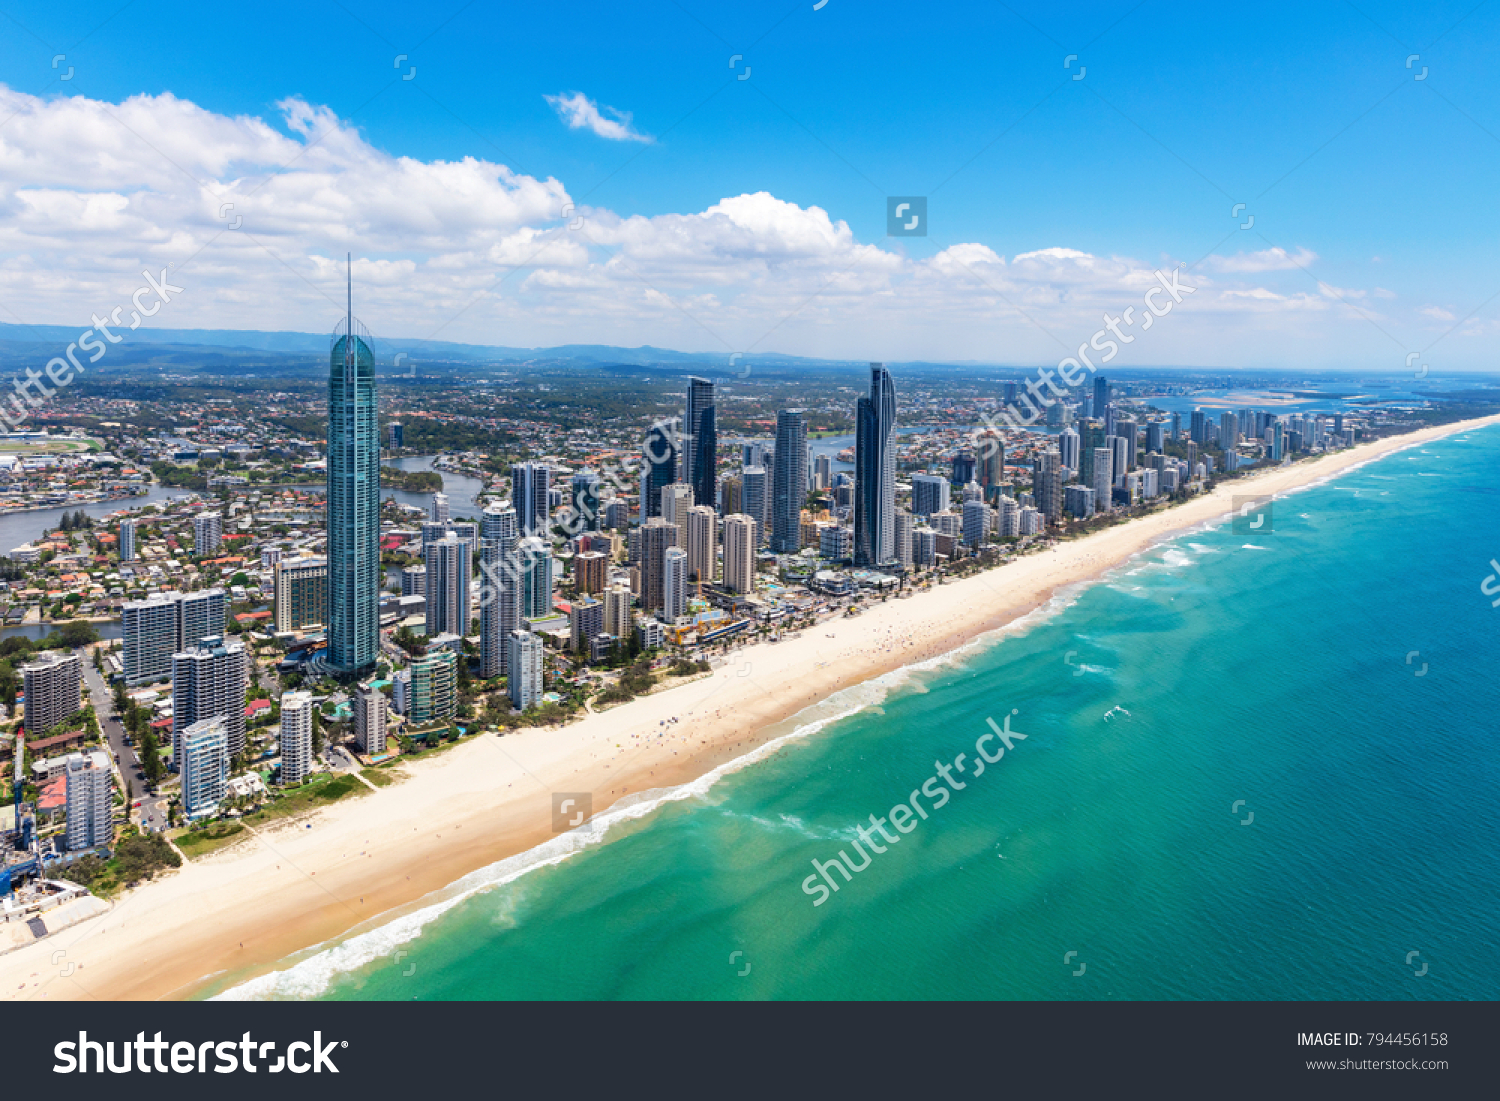 Sunny aerial view of Surfers Paradise looking inland on the Gold Coast, Queensland, Australia #794456158